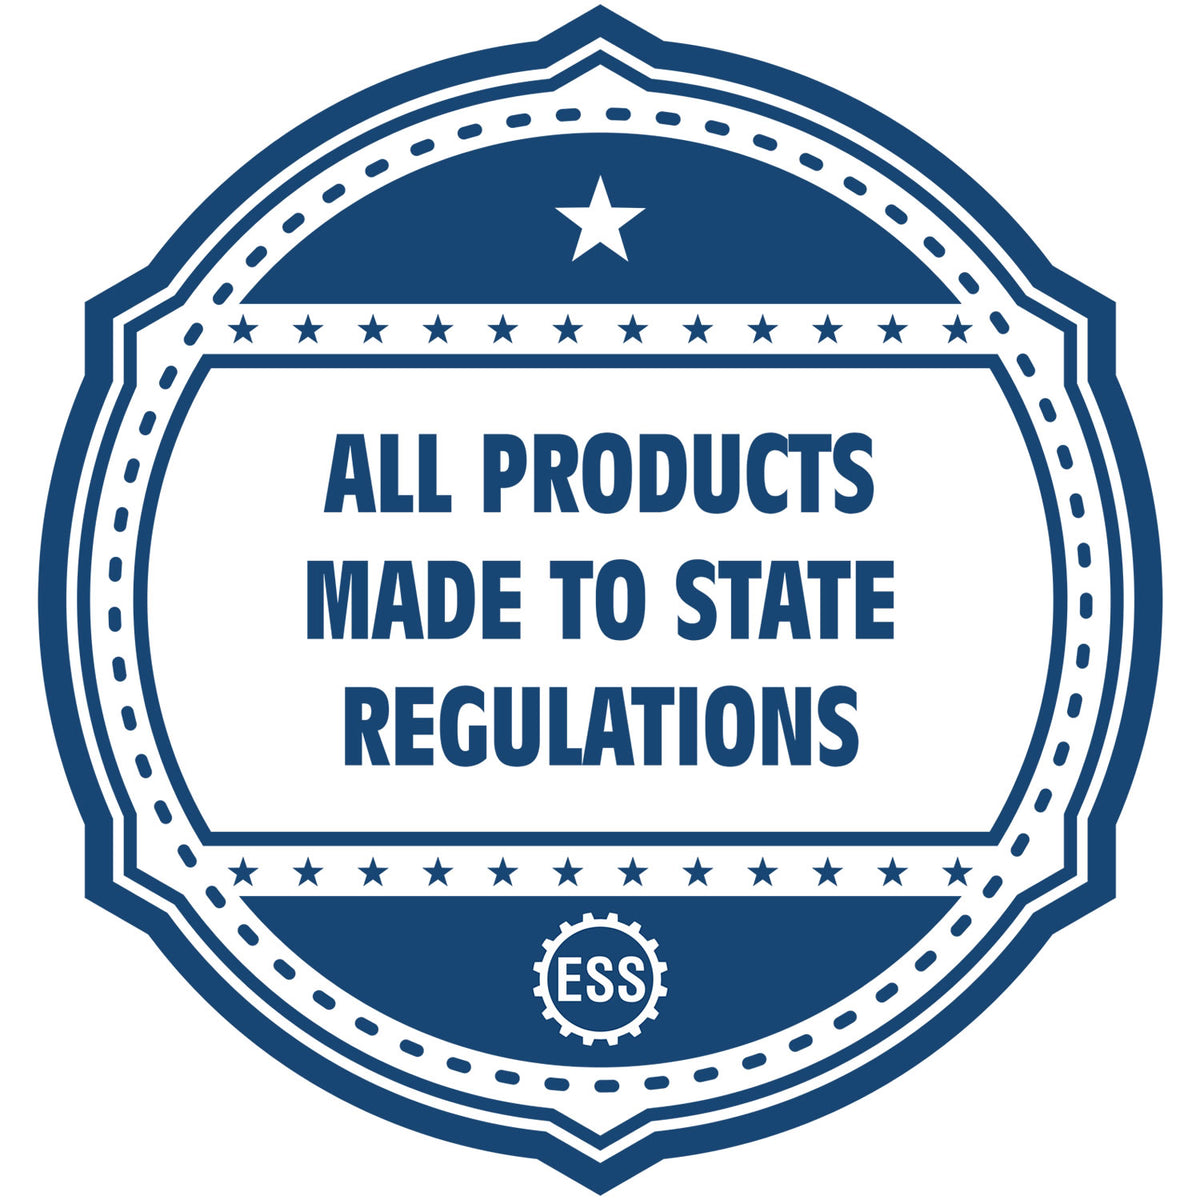 An icon or badge element for the State of New Mexico Soft Land Surveyor Embossing Seal showing that this product is made in compliance with state regulations.